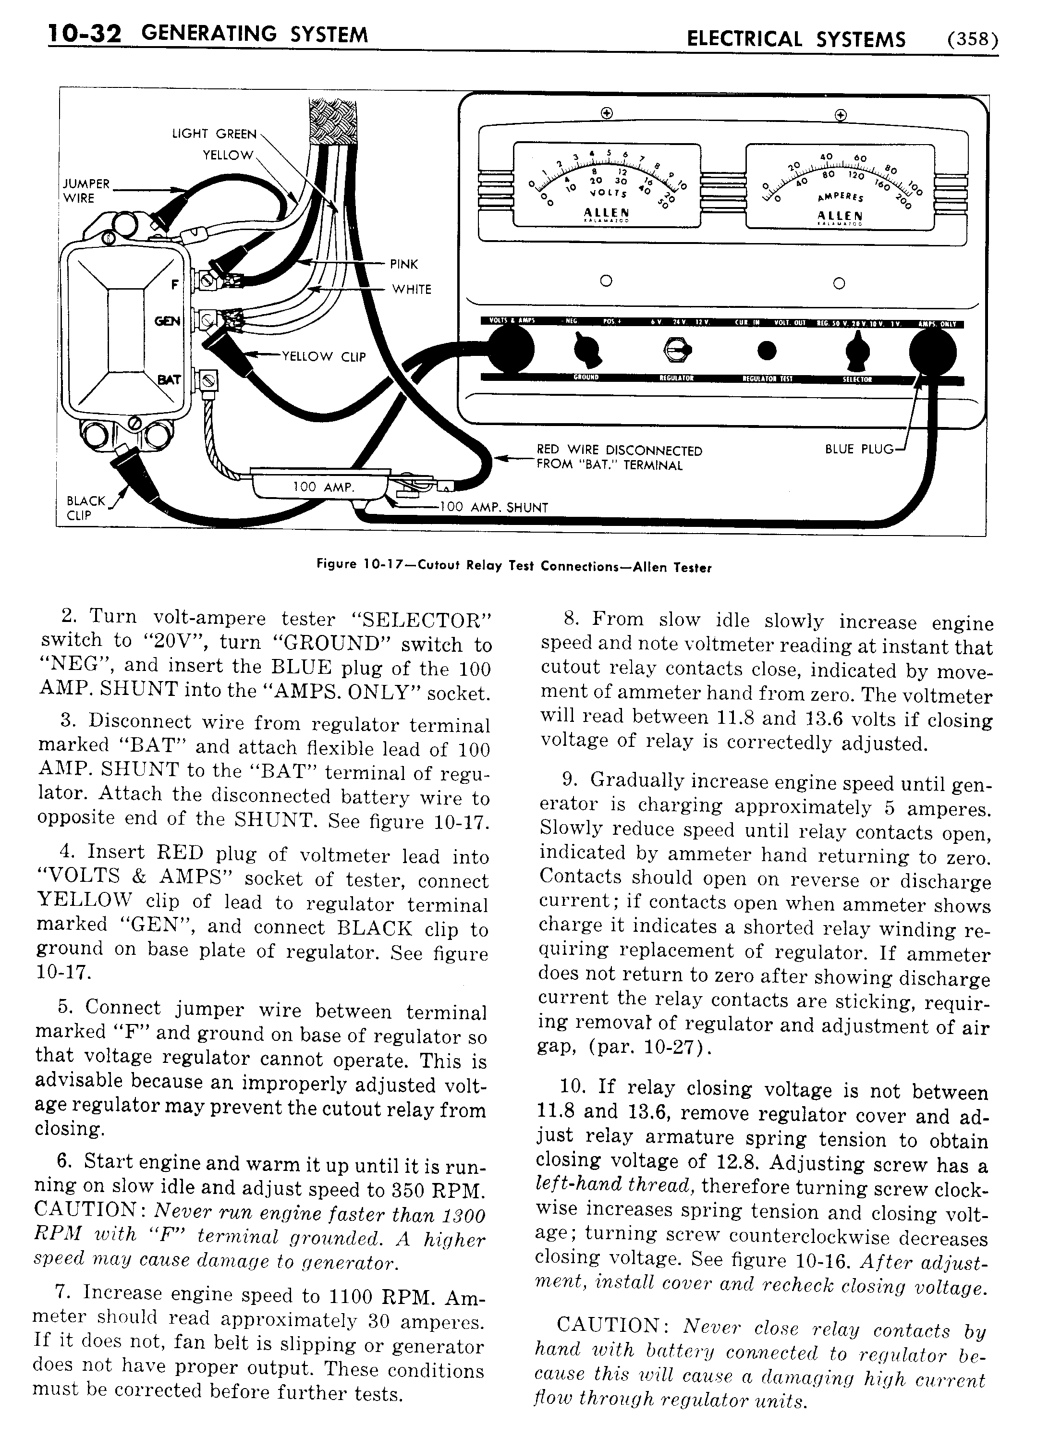 n_11 1956 Buick Shop Manual - Electrical Systems-032-032.jpg